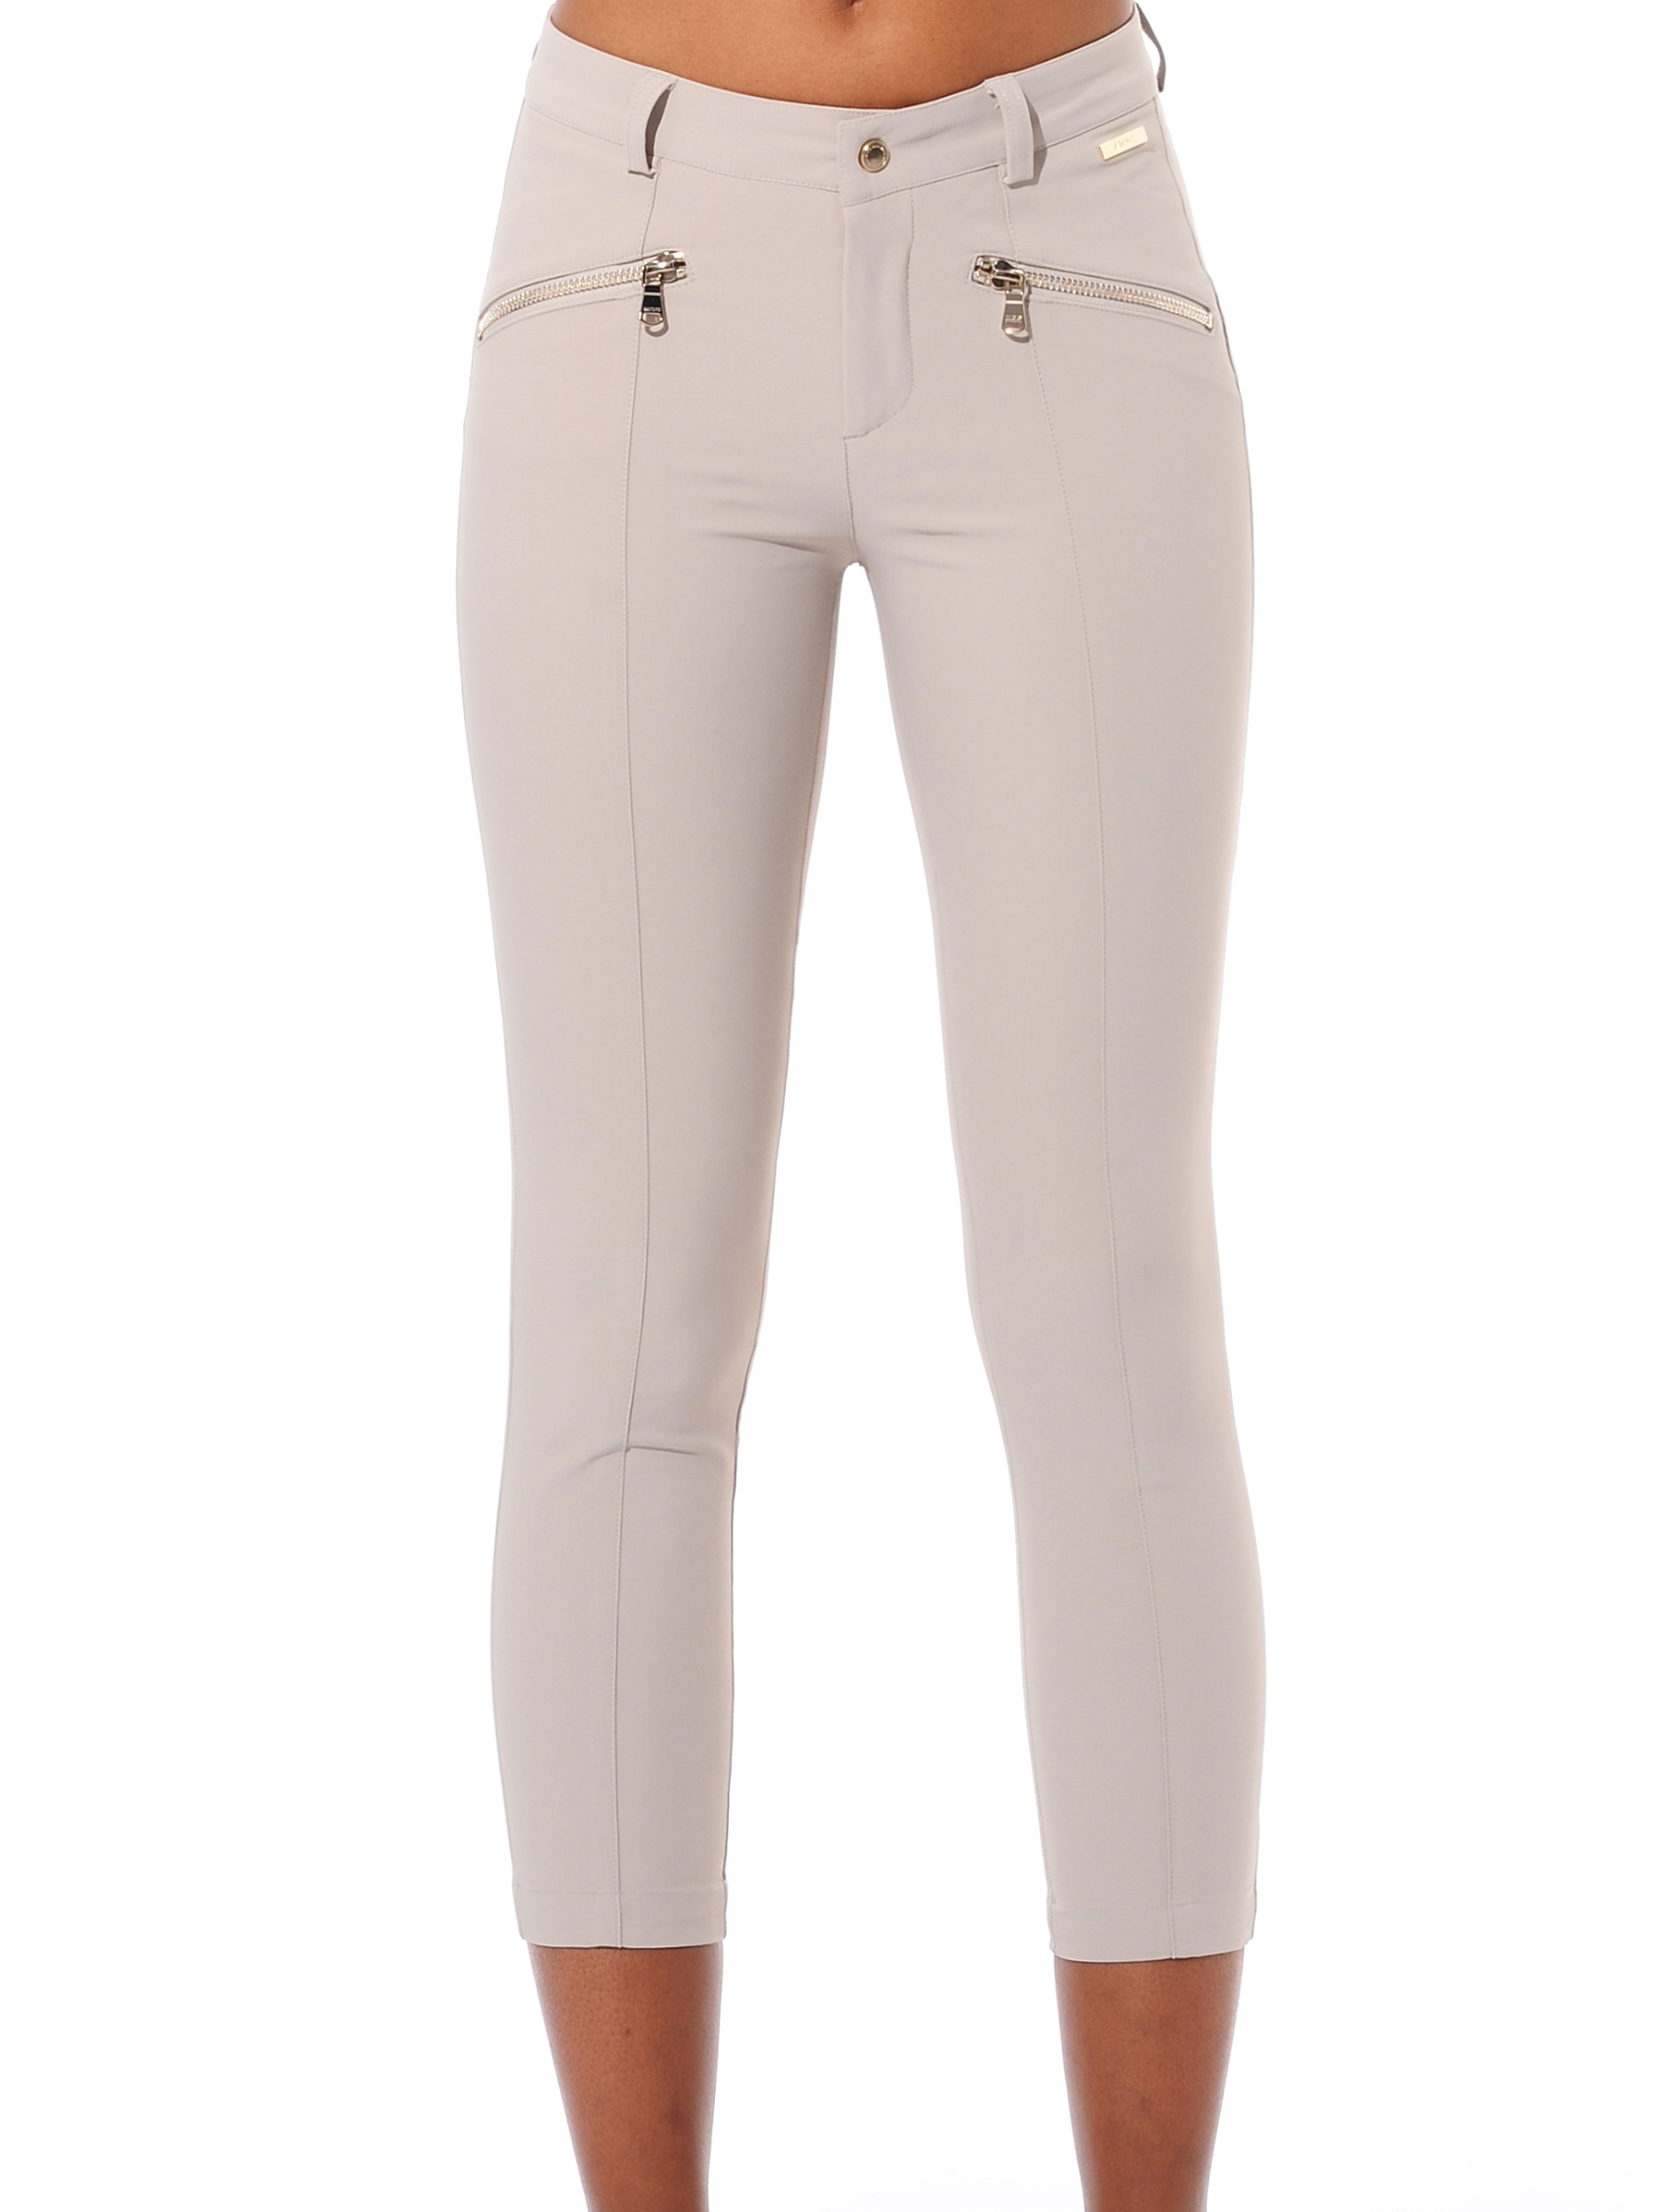 4way stretch curvy cropped pants light taupe 